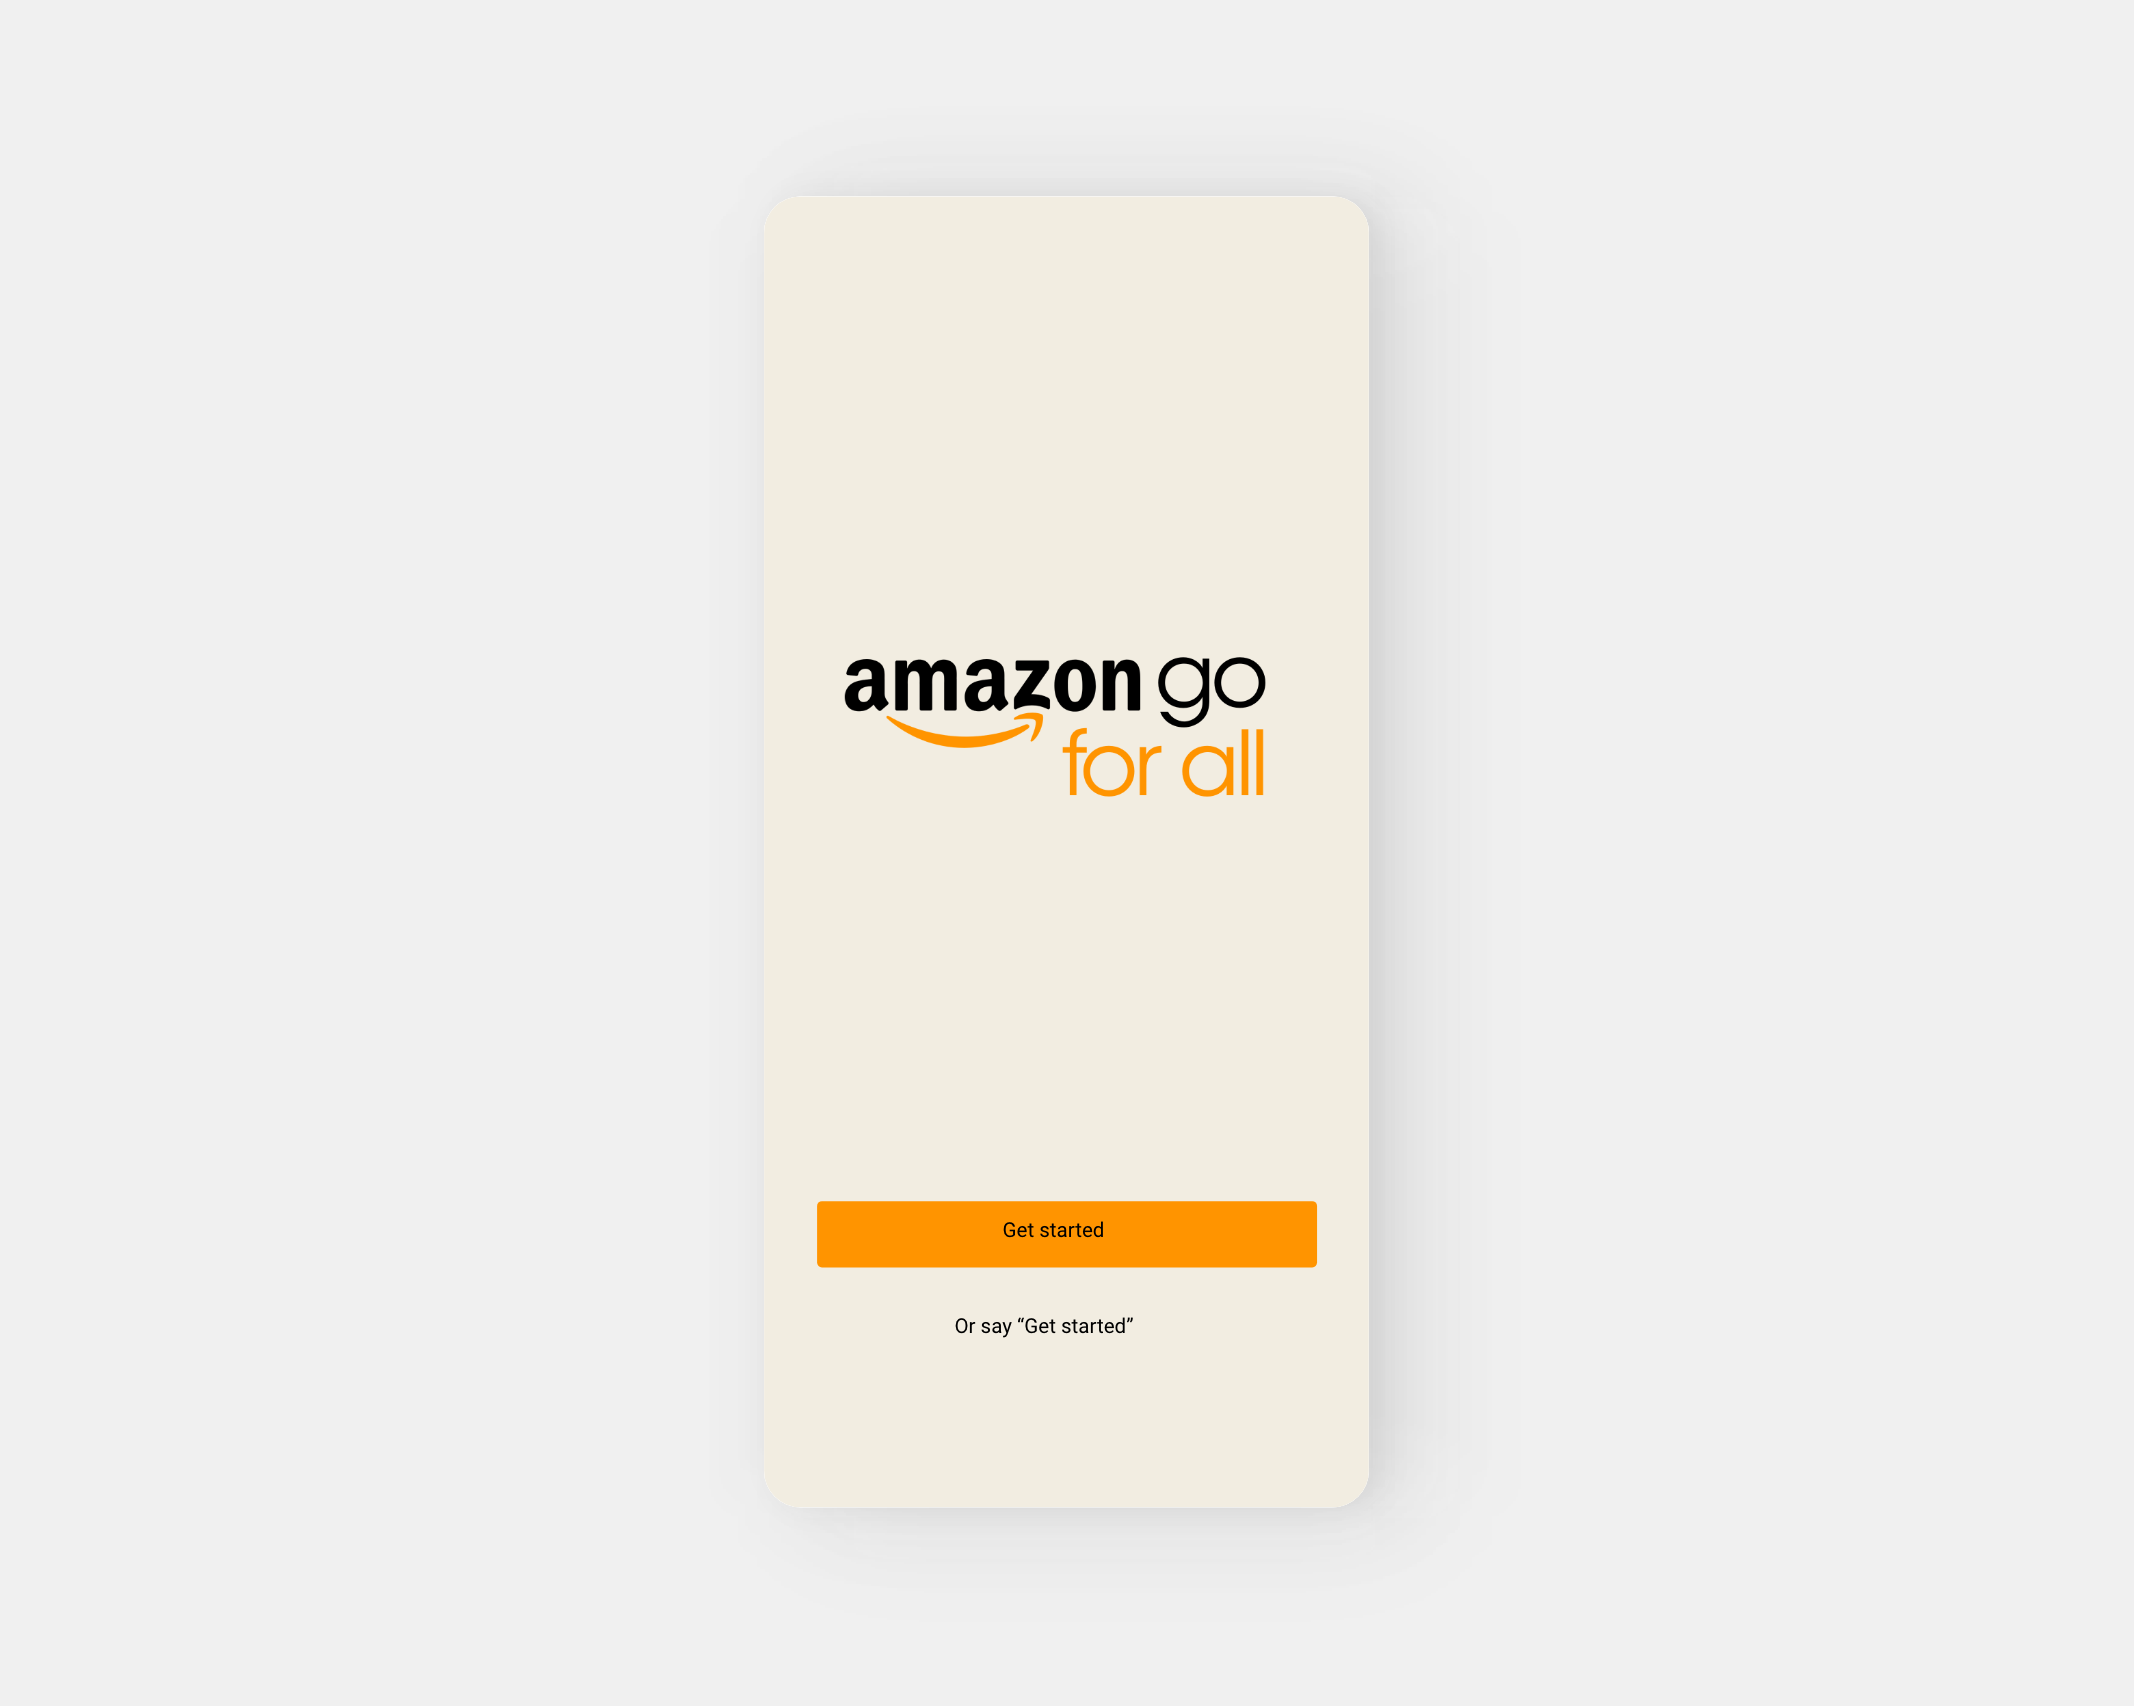 Amazon Go for All